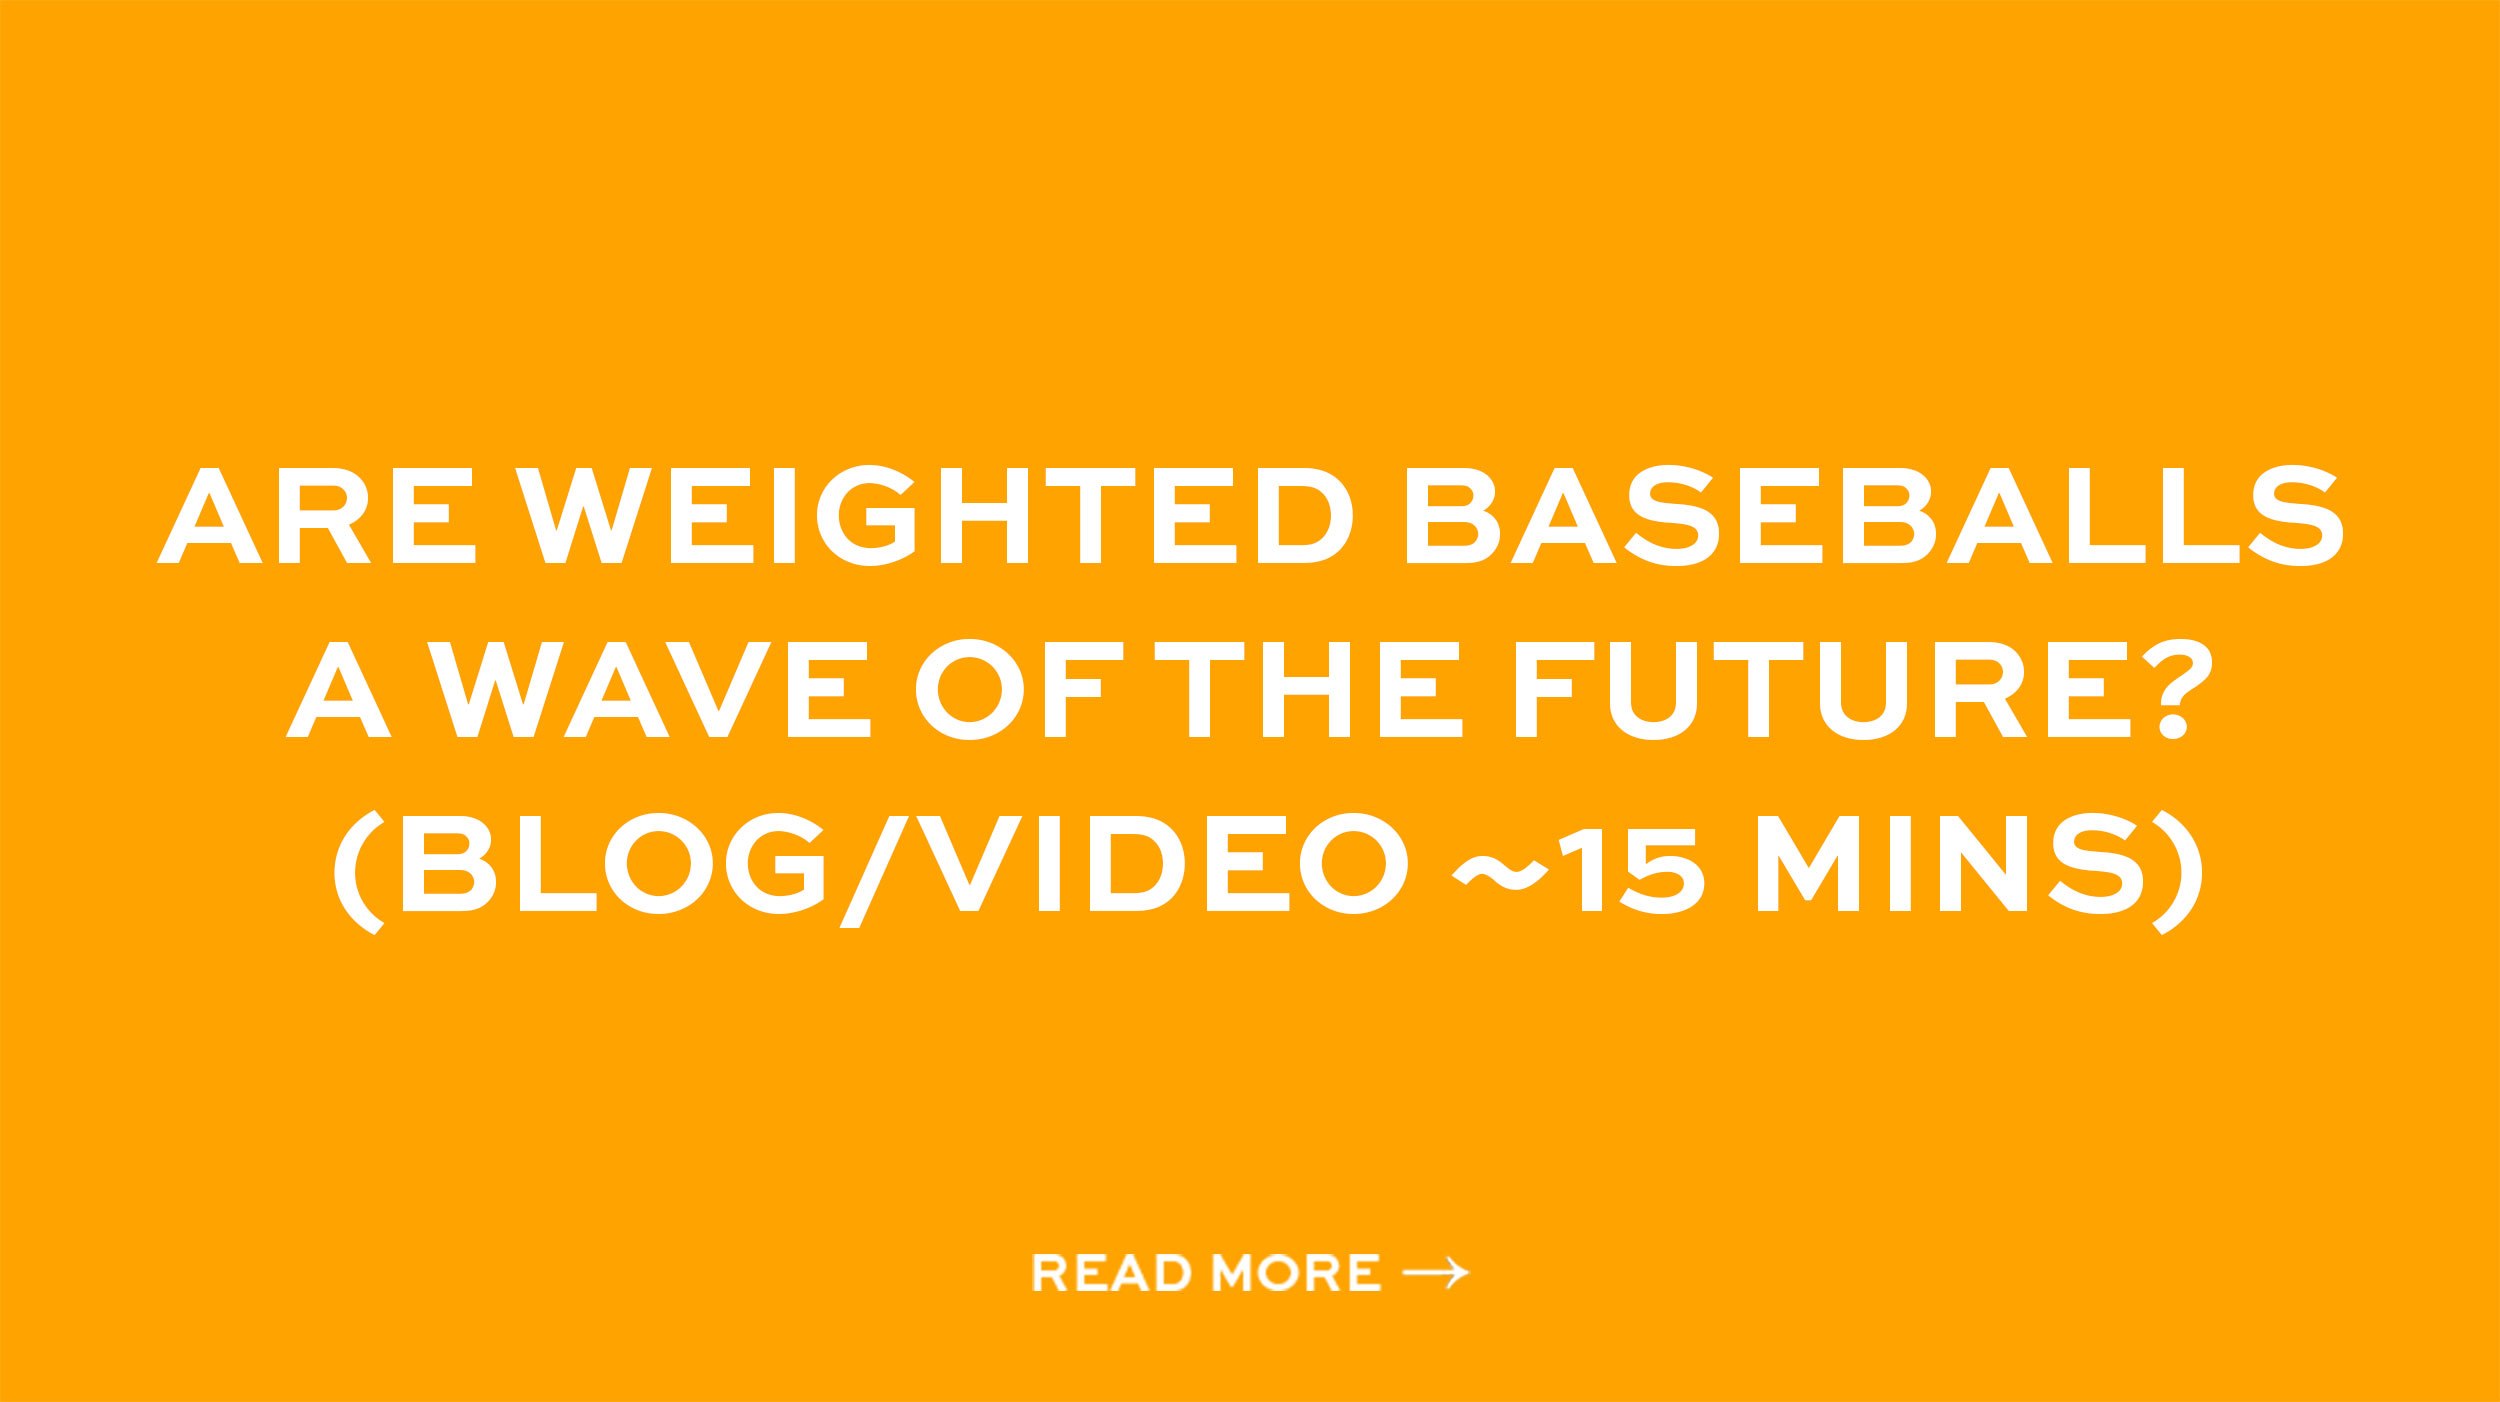 Are weighted baseballs a wave of the future? (Blog/Video ~15 mins)